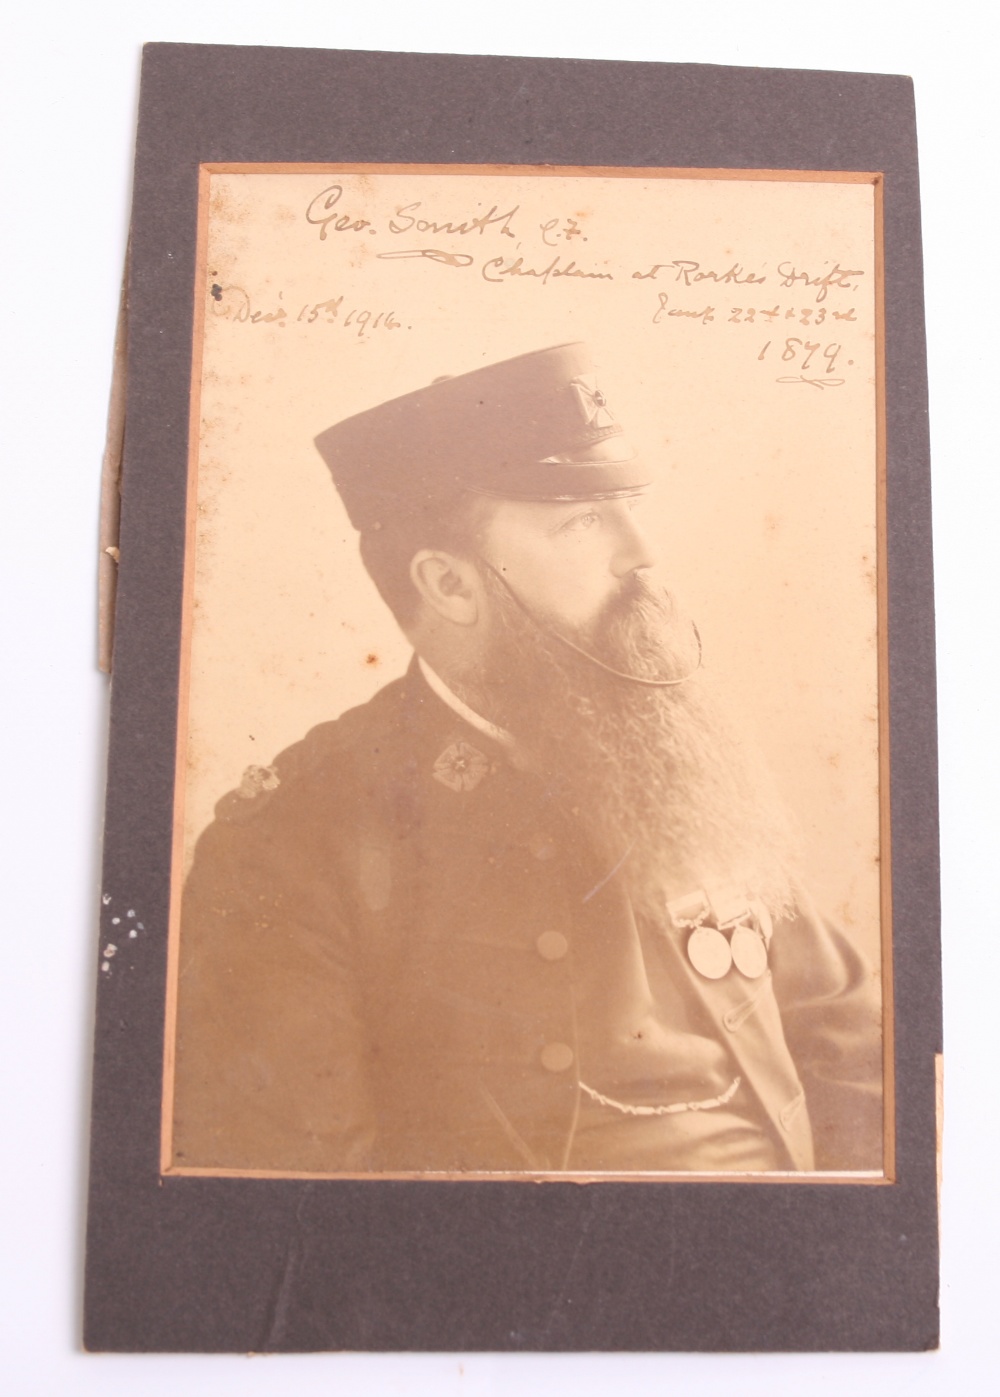 Cabinet Photograph of George Smith, Chaplain at Rorkes Drift 1879, the photograph shows smith in